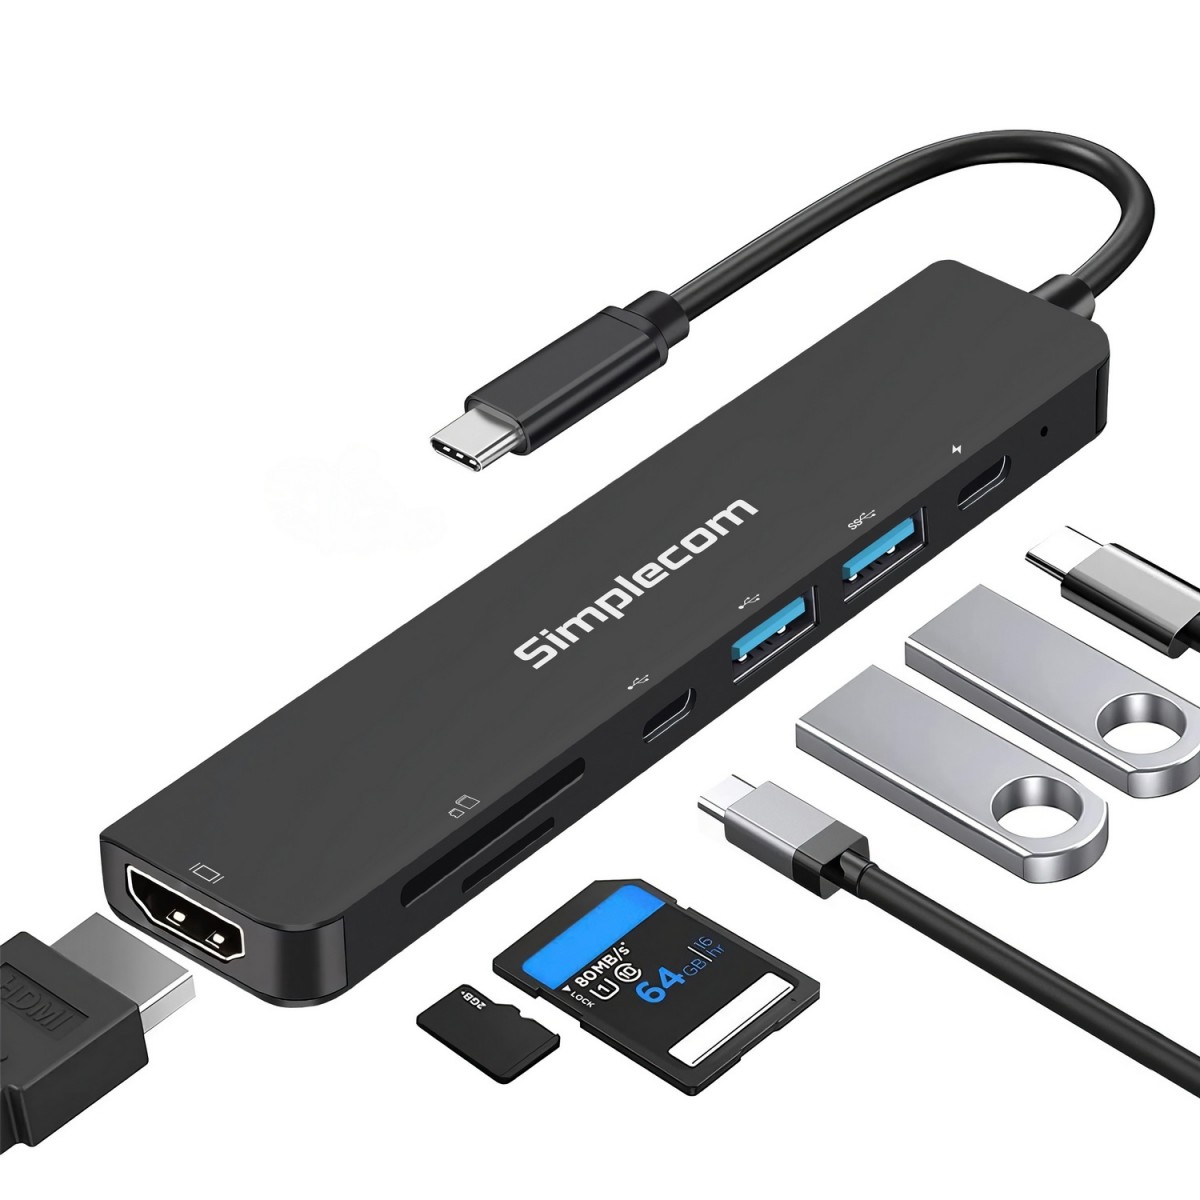  USB Type-C 7-in-1 Multiport Adapter USB Hub, HDMI, Card Reader, PD  